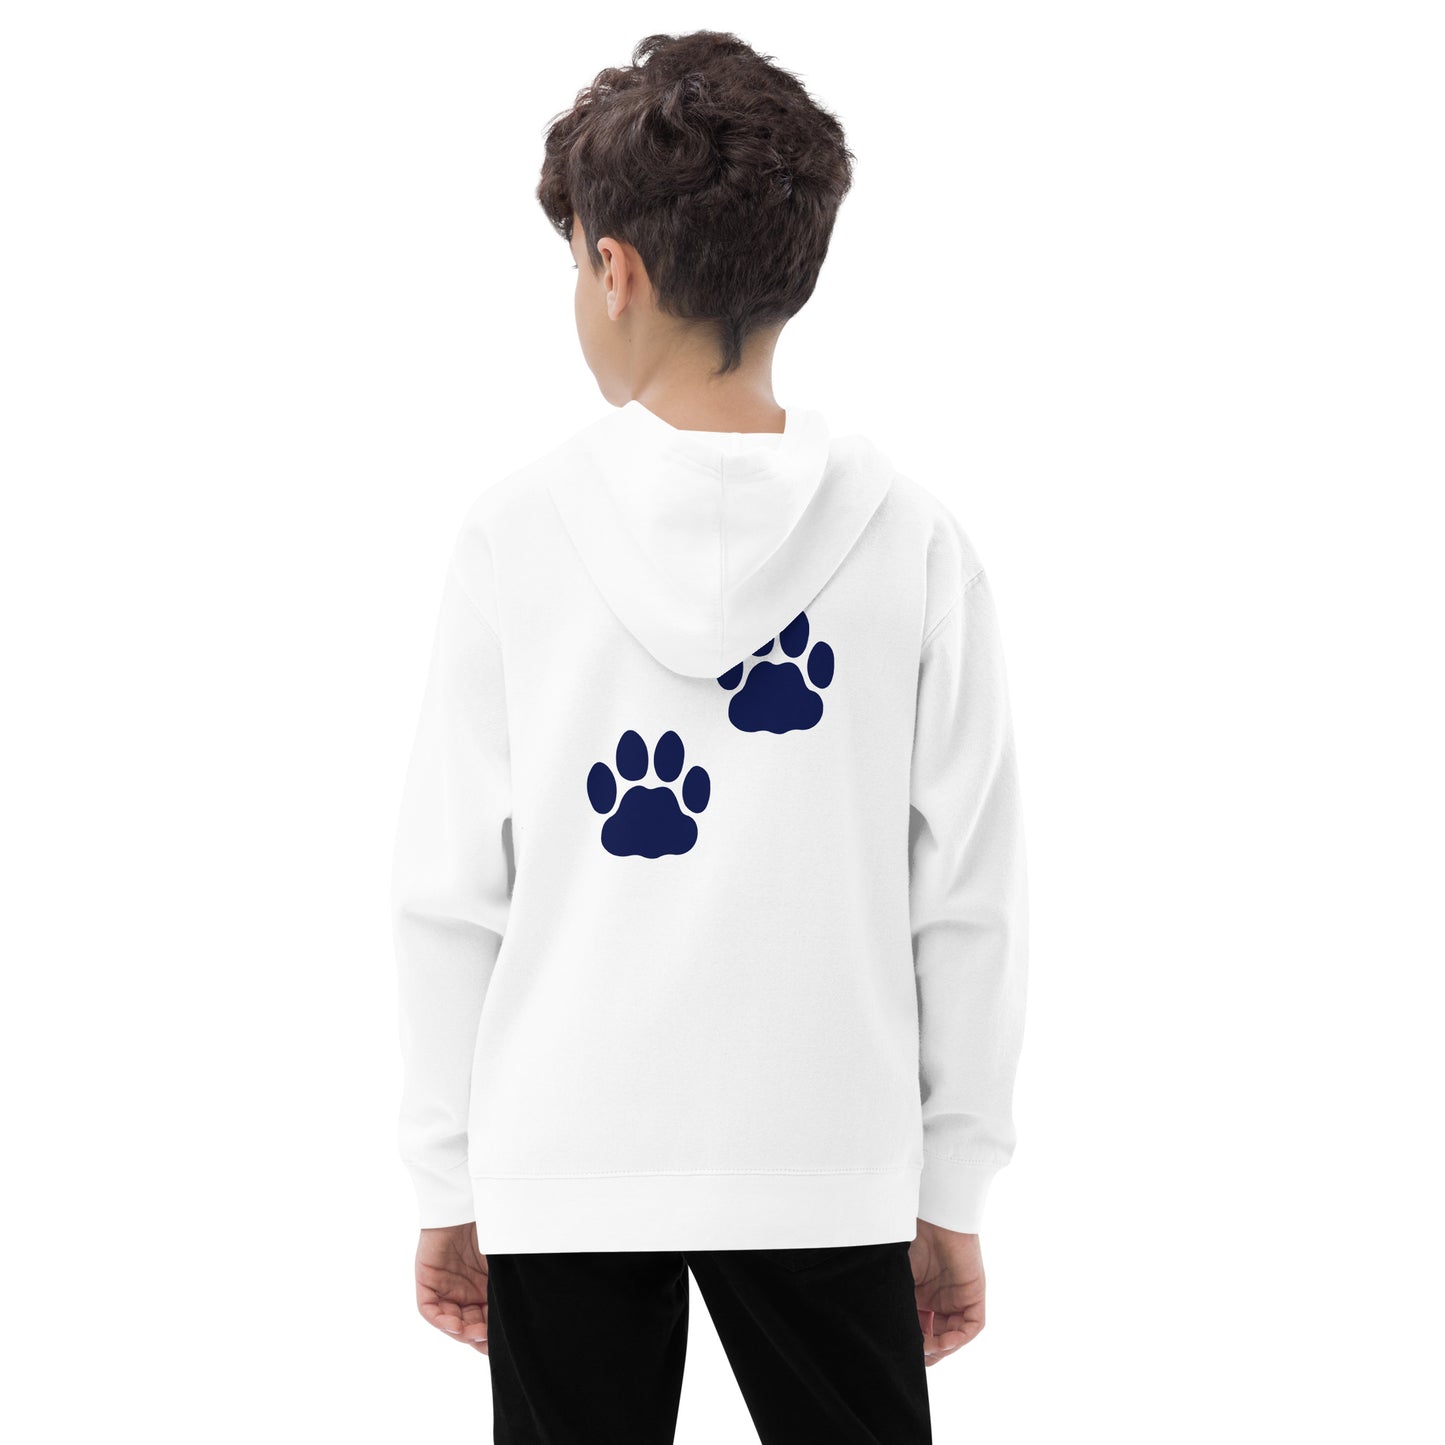 Kids Hoodie - MR with Paws